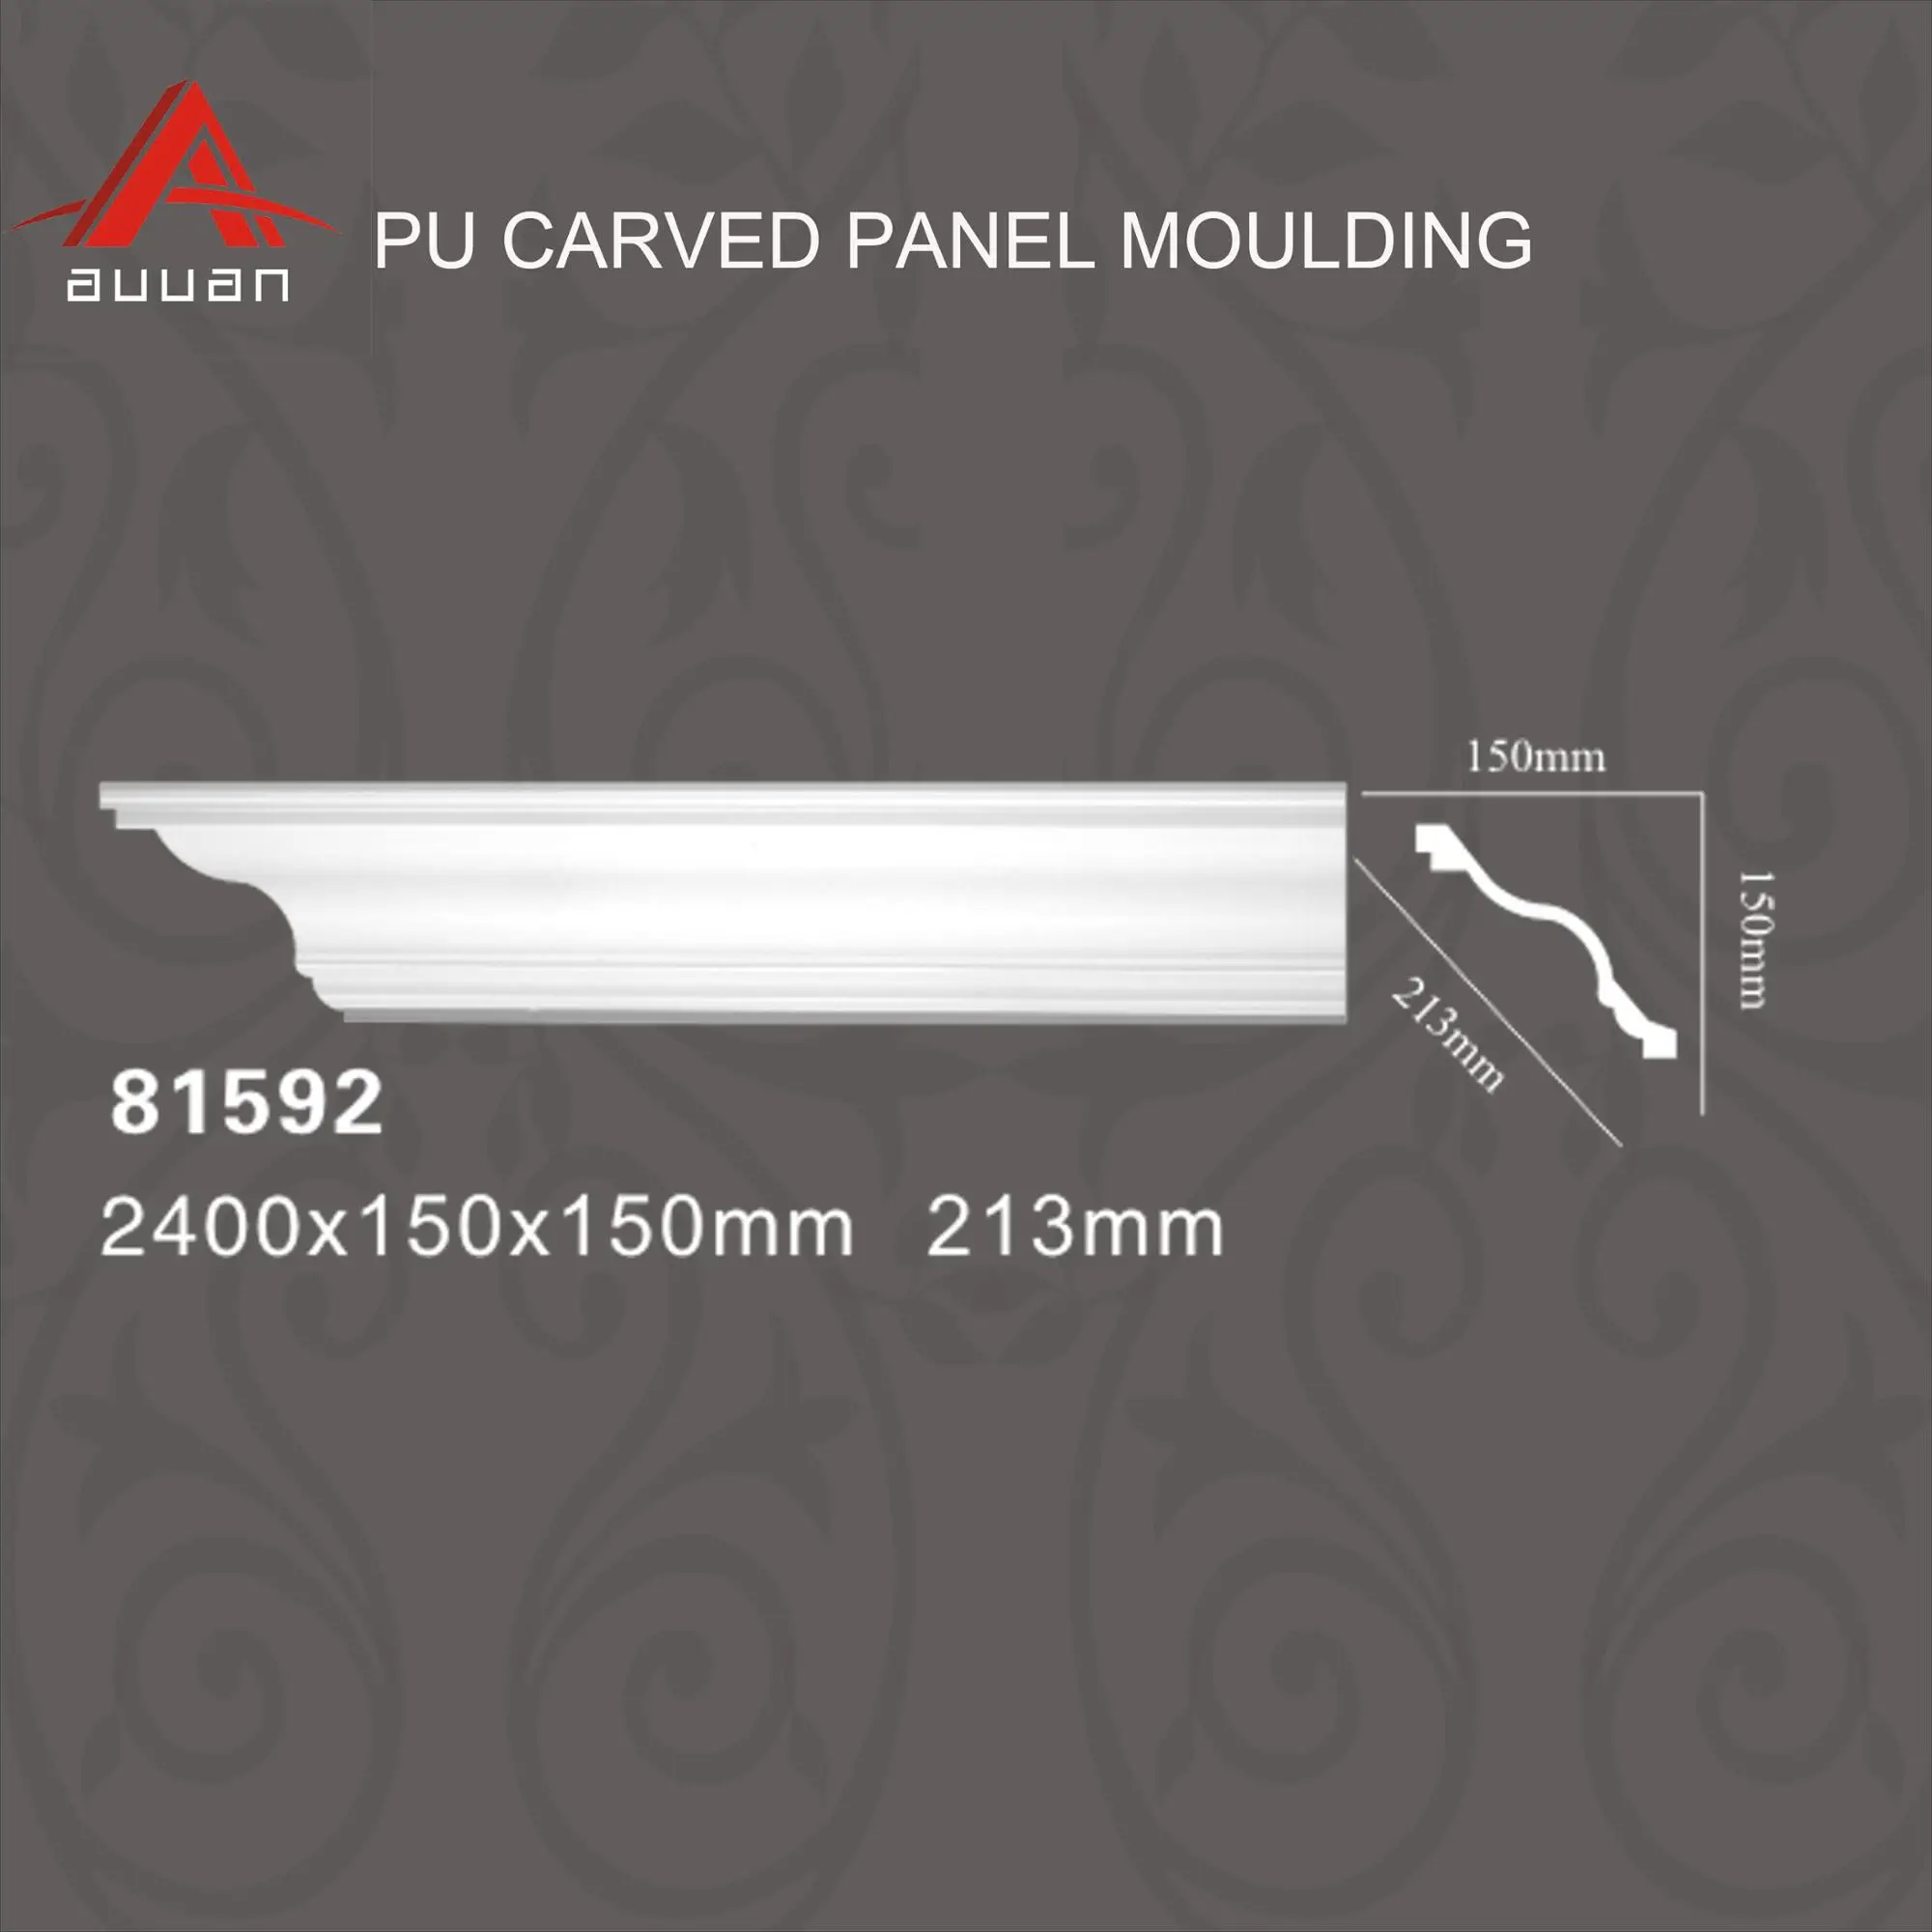 81592 Contemporary Ceiling Coving Molding For Victorian Ceiling View Contemporary Coving Auuan Product Details From Guangzhou Auuan Decorative